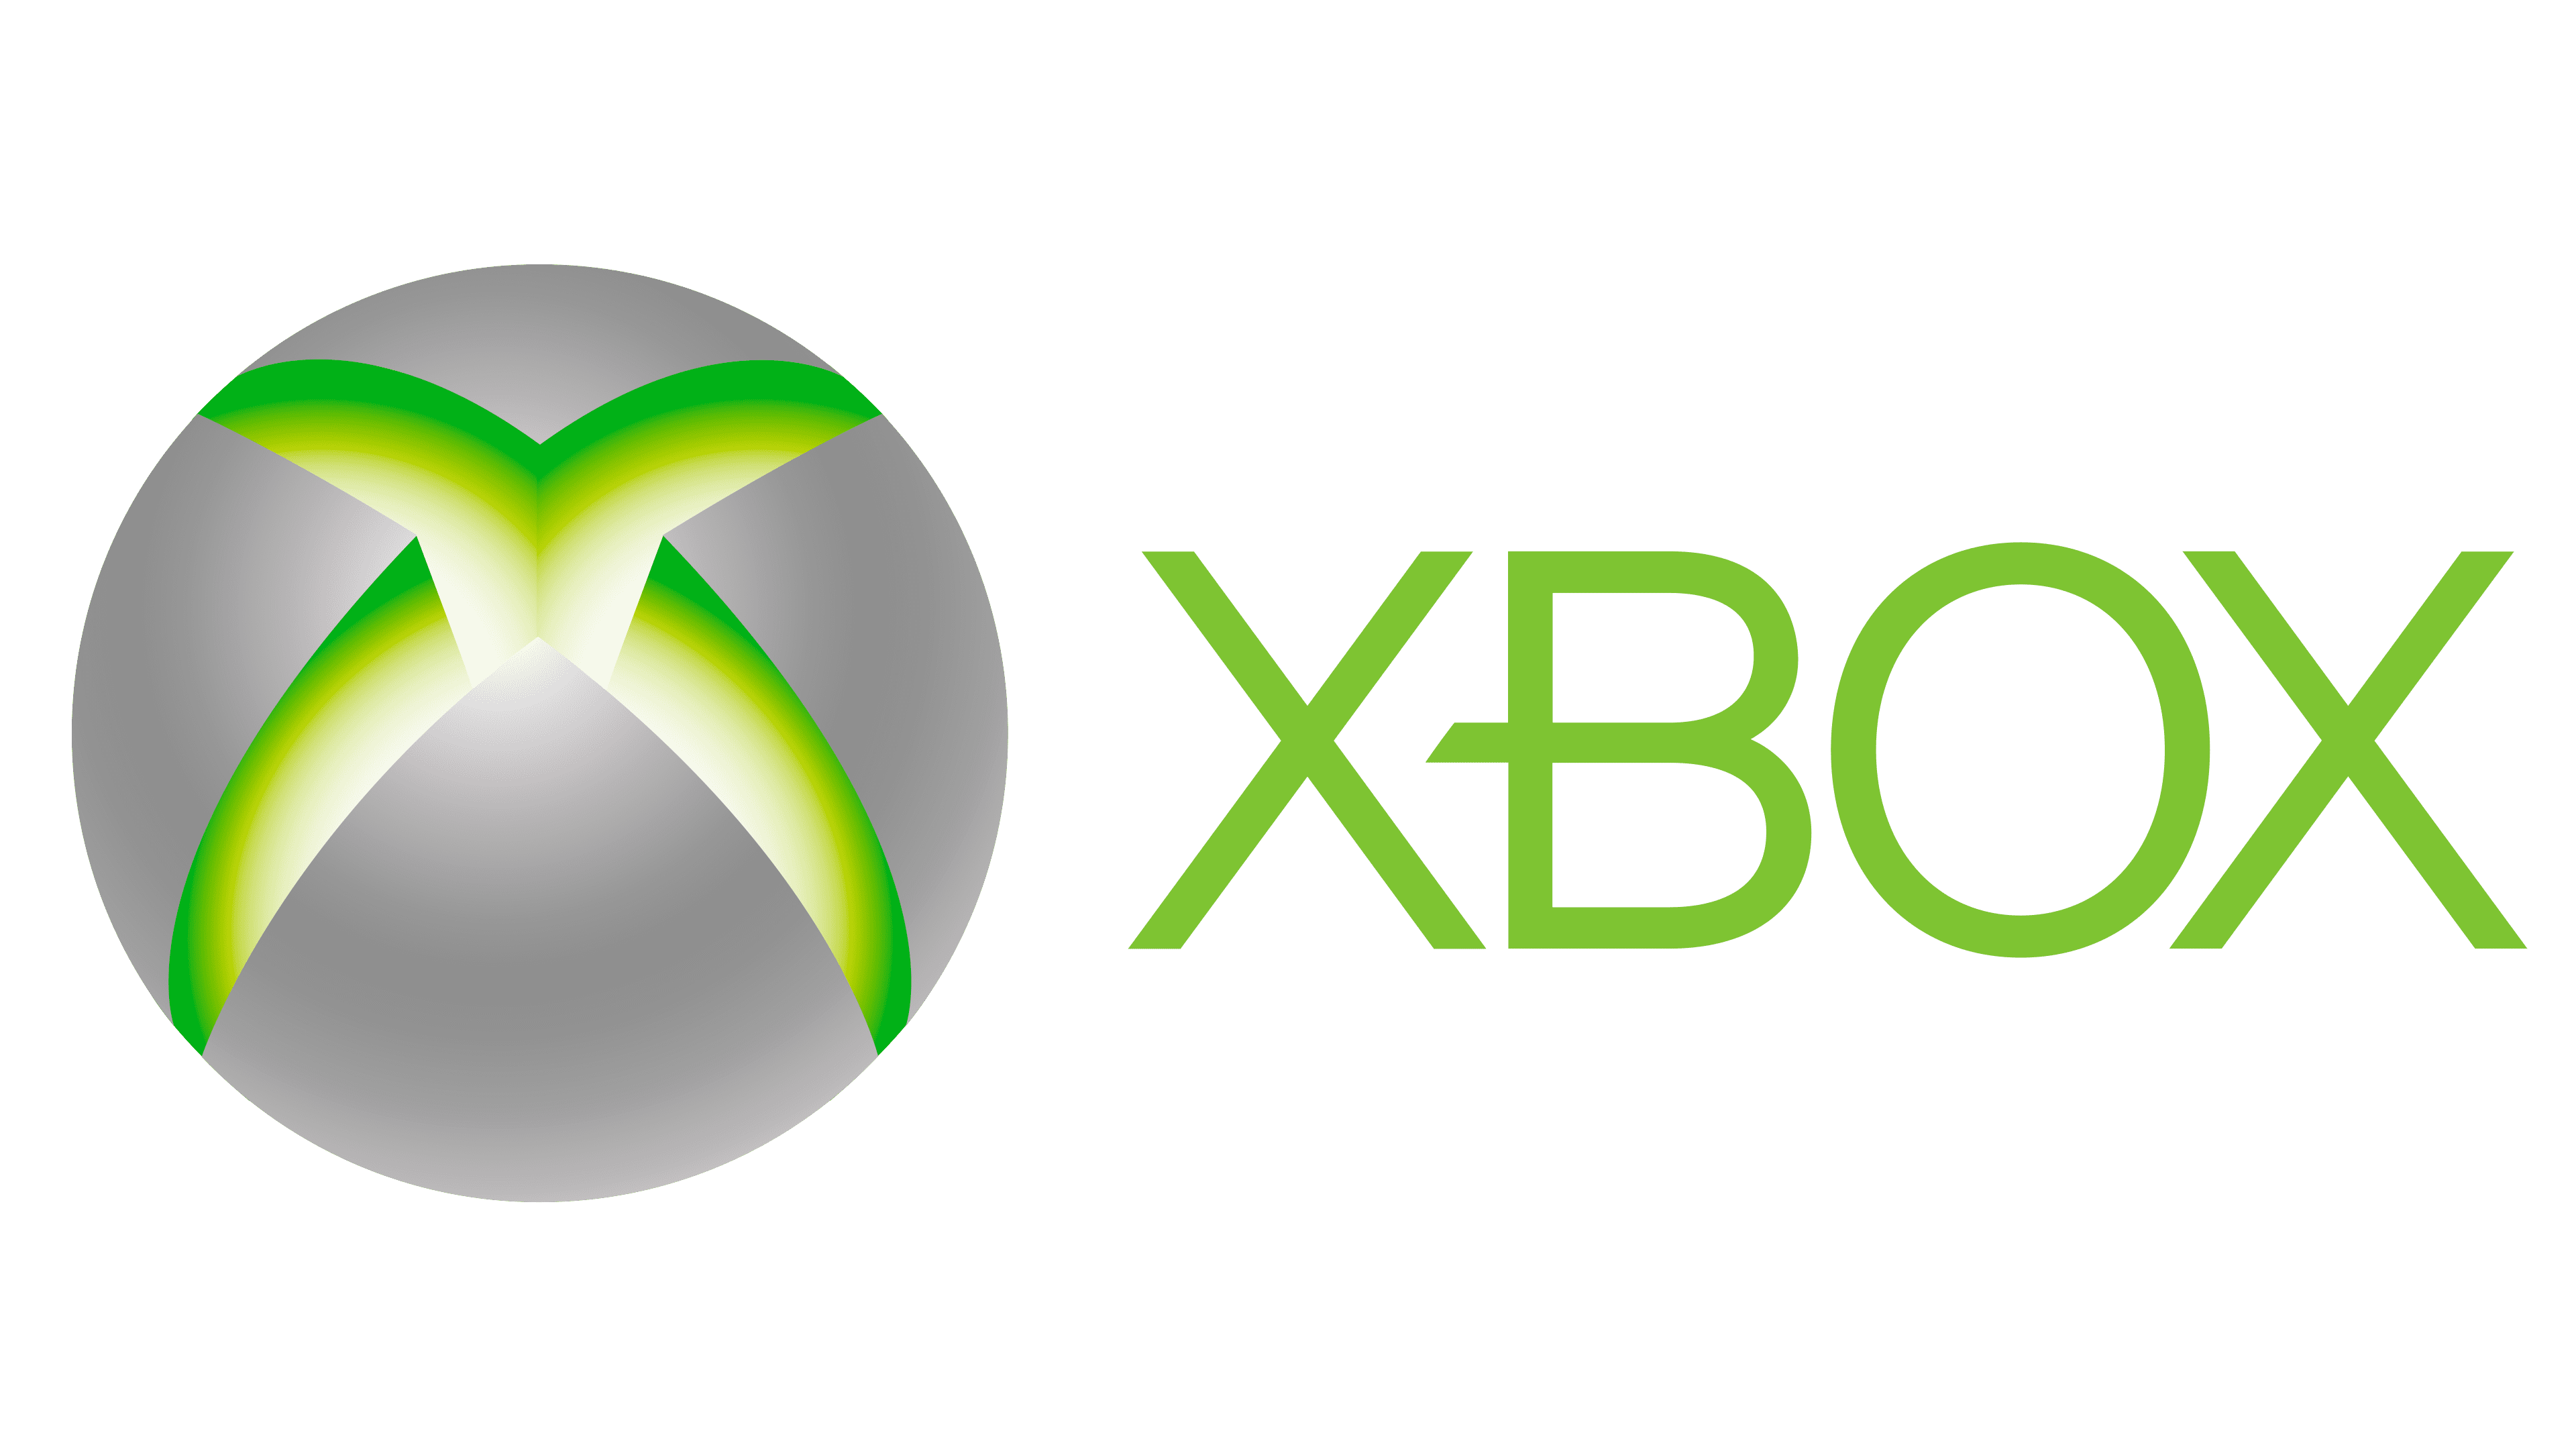 Evaluatie aanval verder Xbox Logo, symbol, meaning, history, PNG, brand